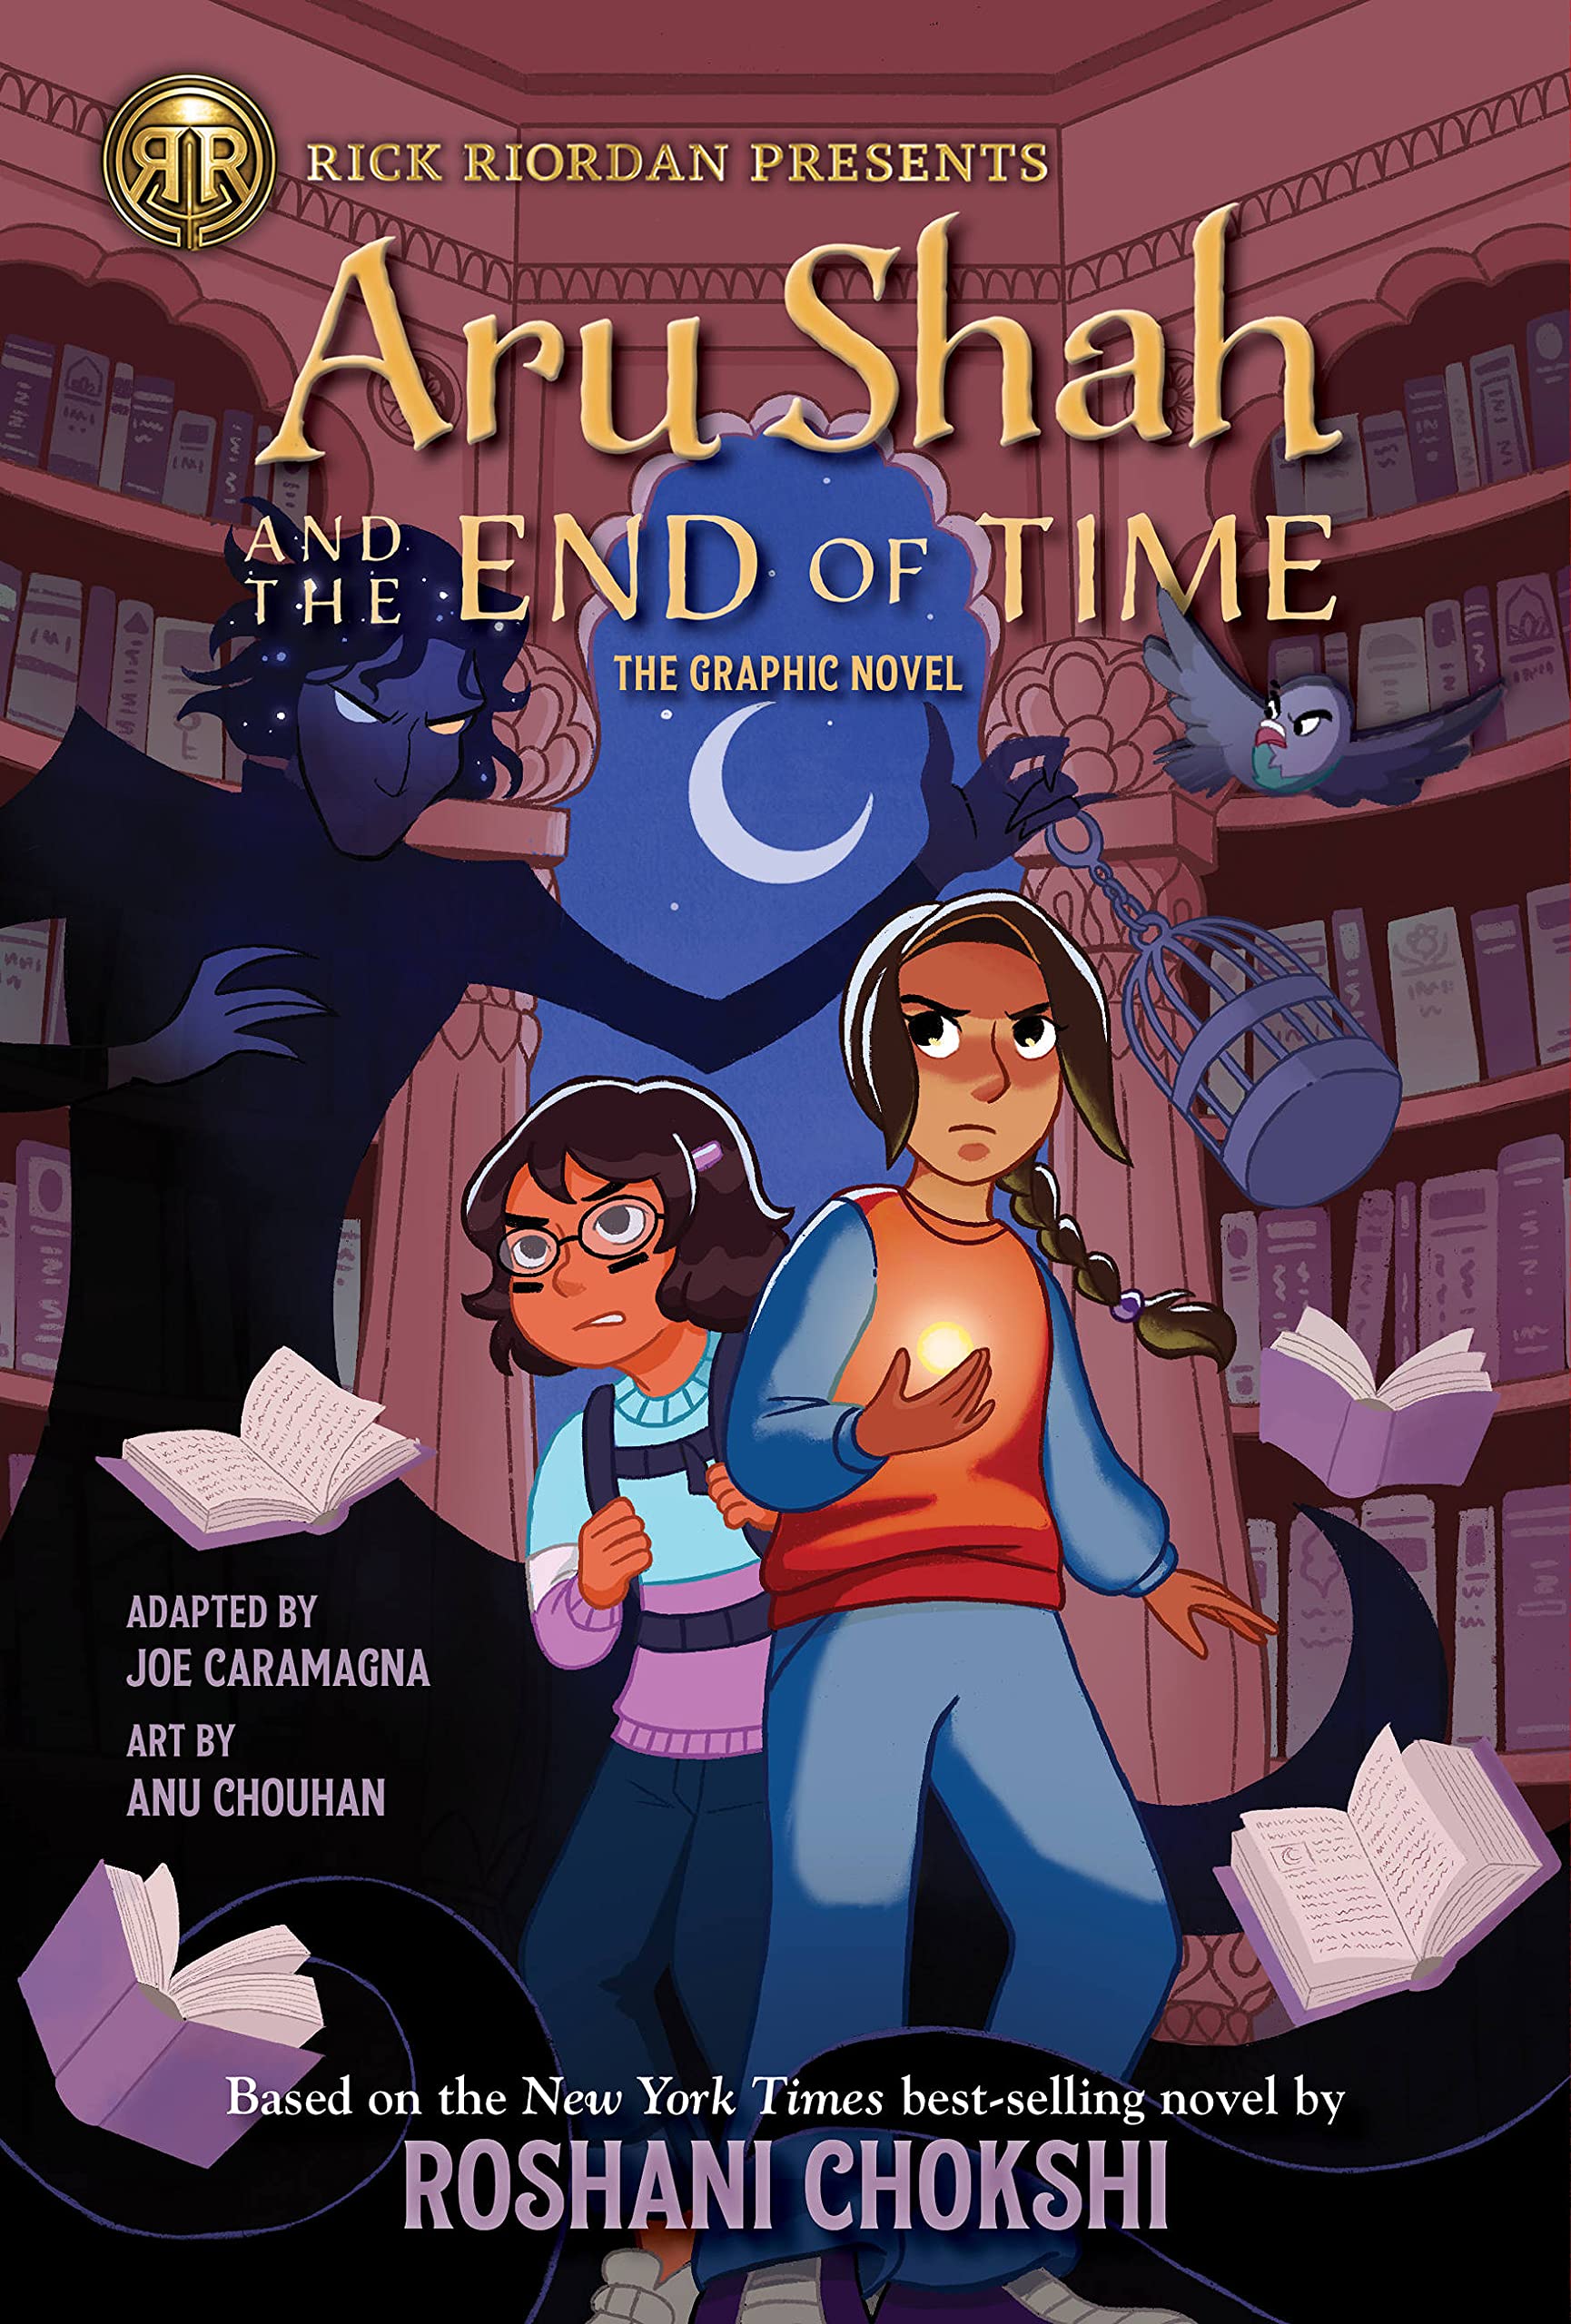 Image for "Aru Shah and the End of Time"